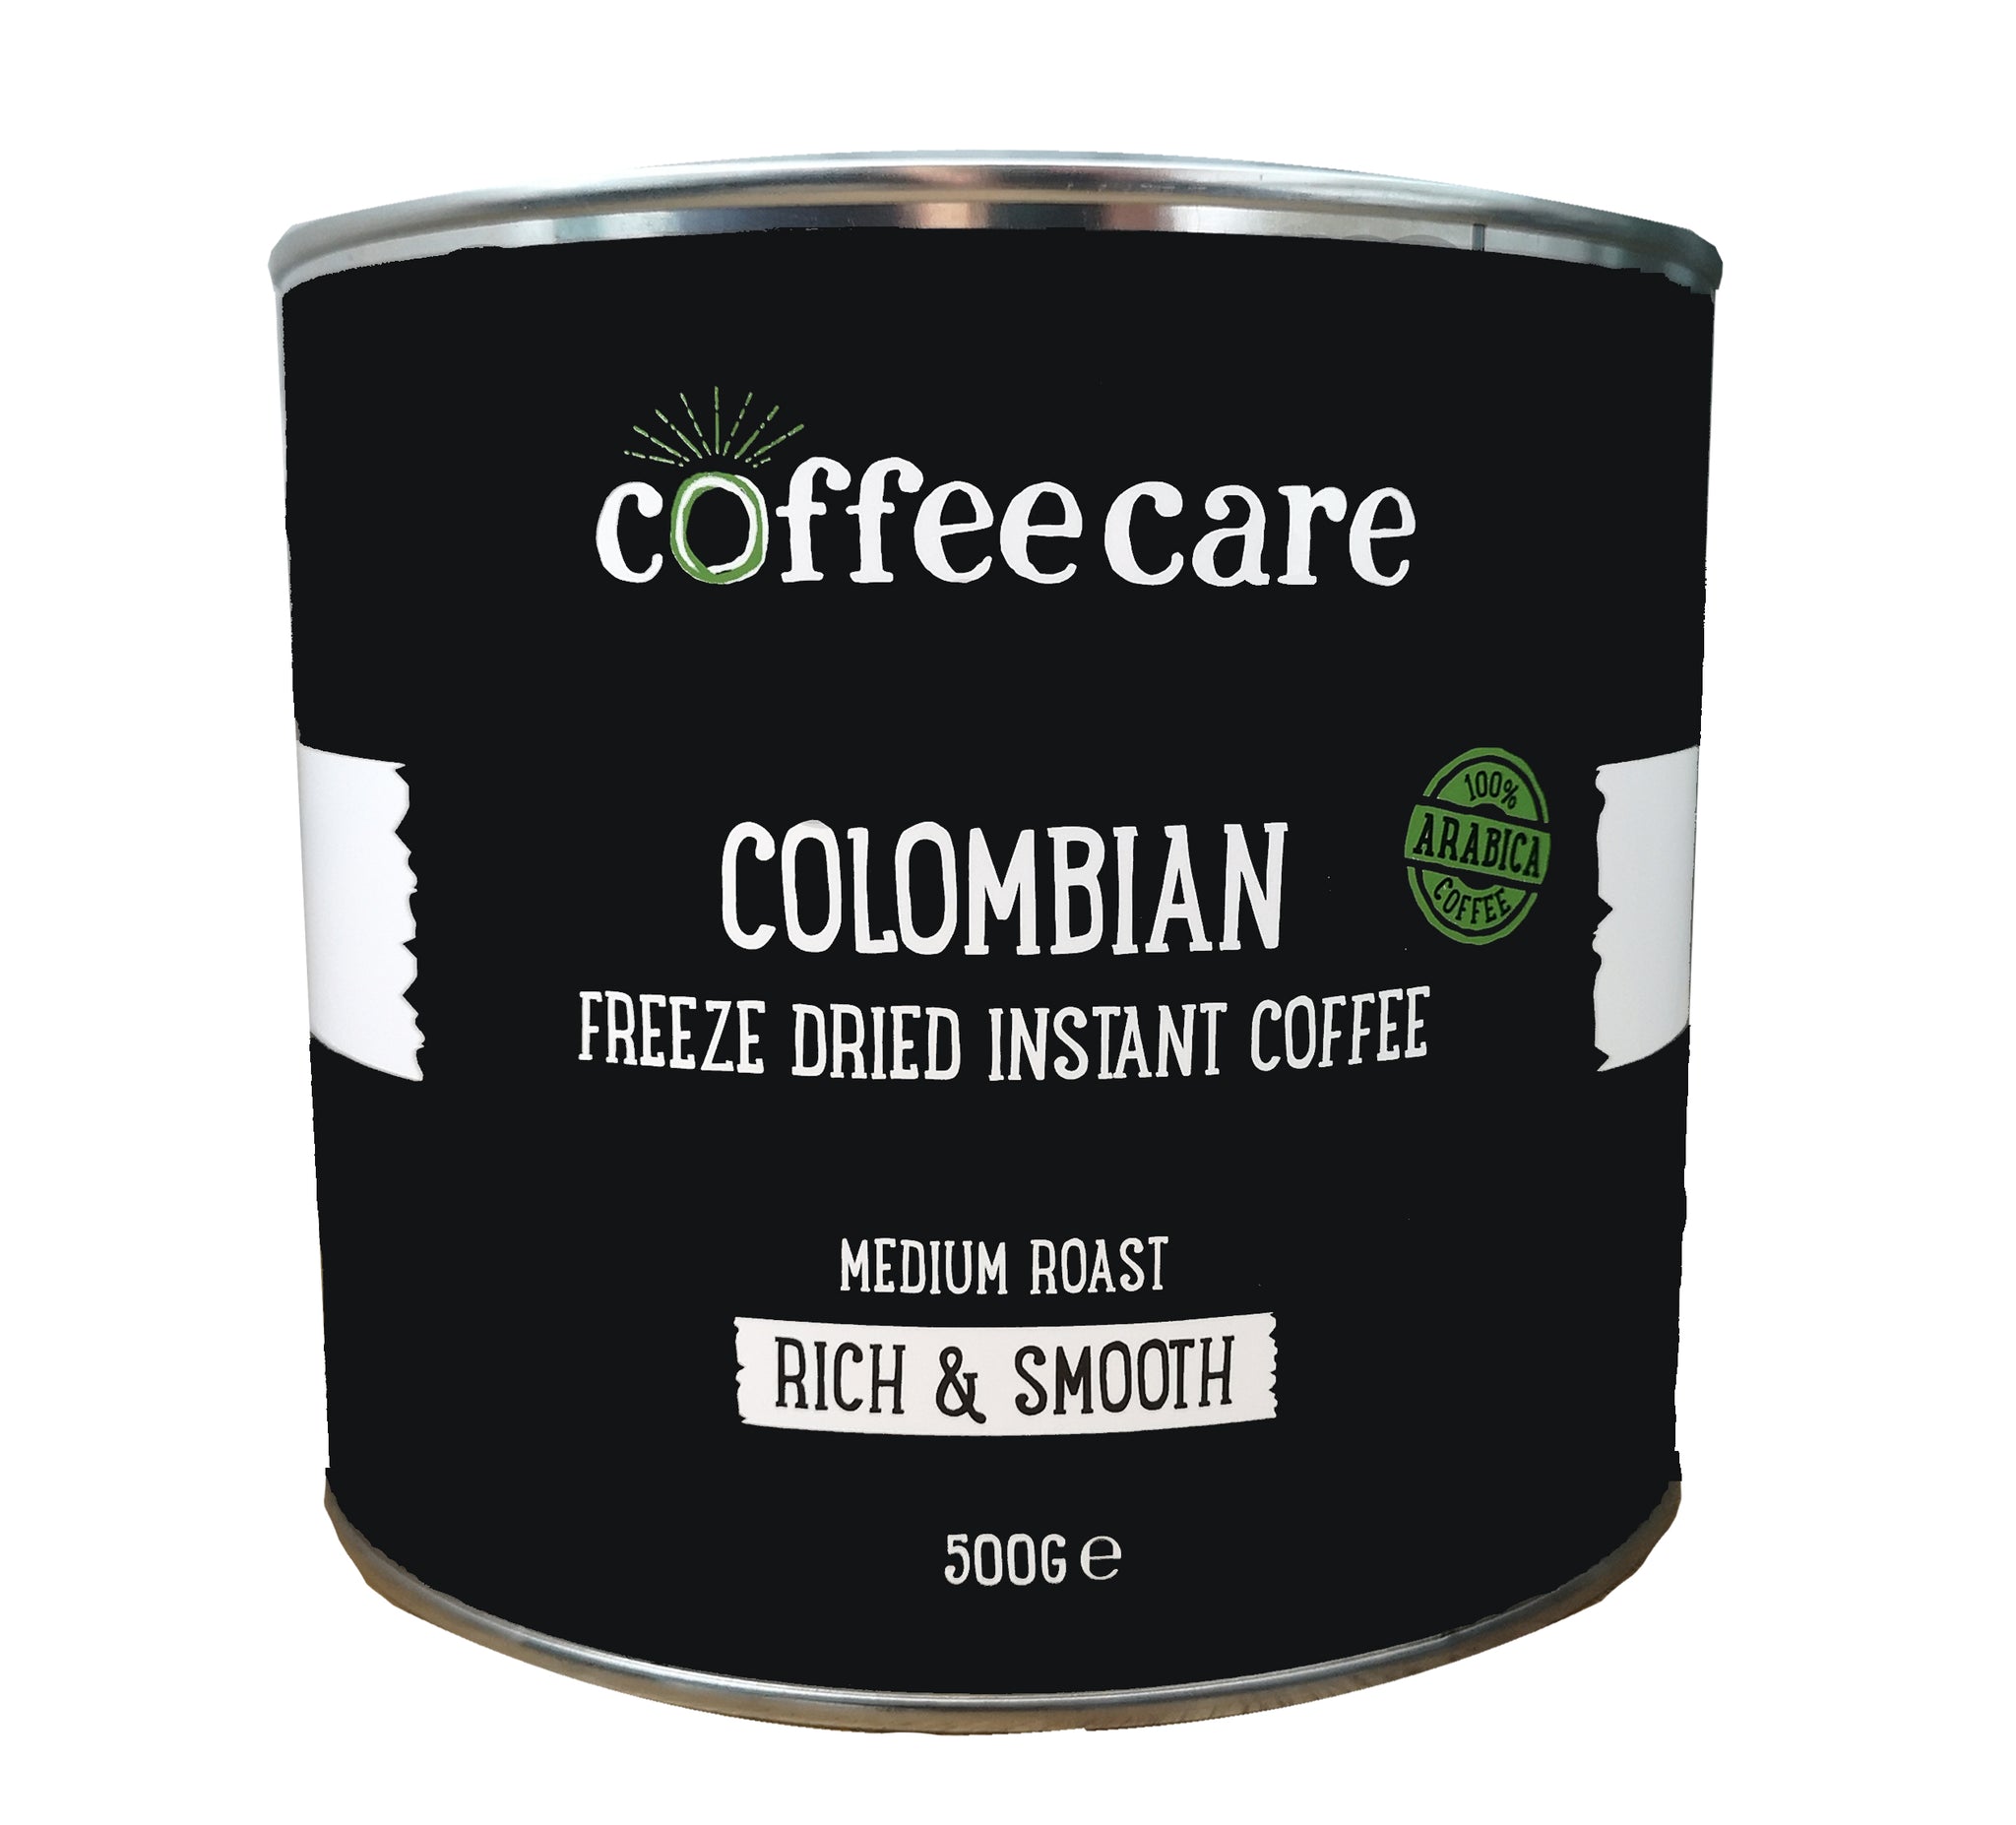 metal tin of Coffee Care's Colombian Freeze Dried Instant Coffee. 500g of arabica coffee. Medium roast, rich and smooth 